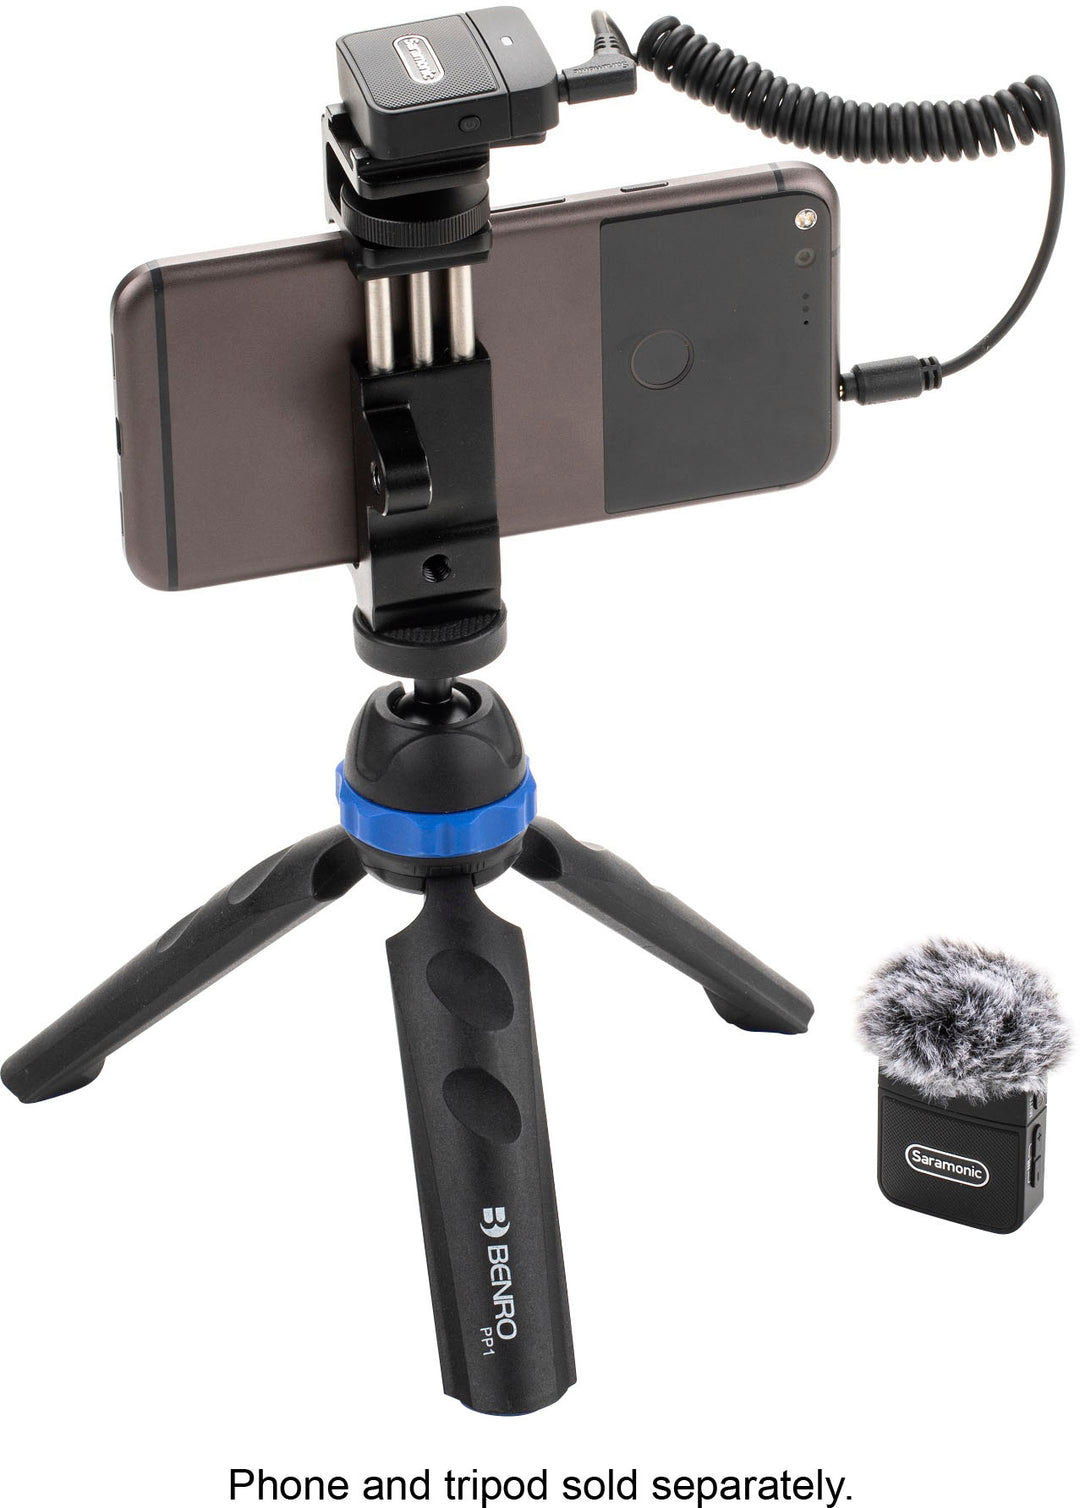 Saramonic - Blink 100 B1 Ultra-Portable Clip-On Wireless Microphone System for Cameras & Mobile Devices_2